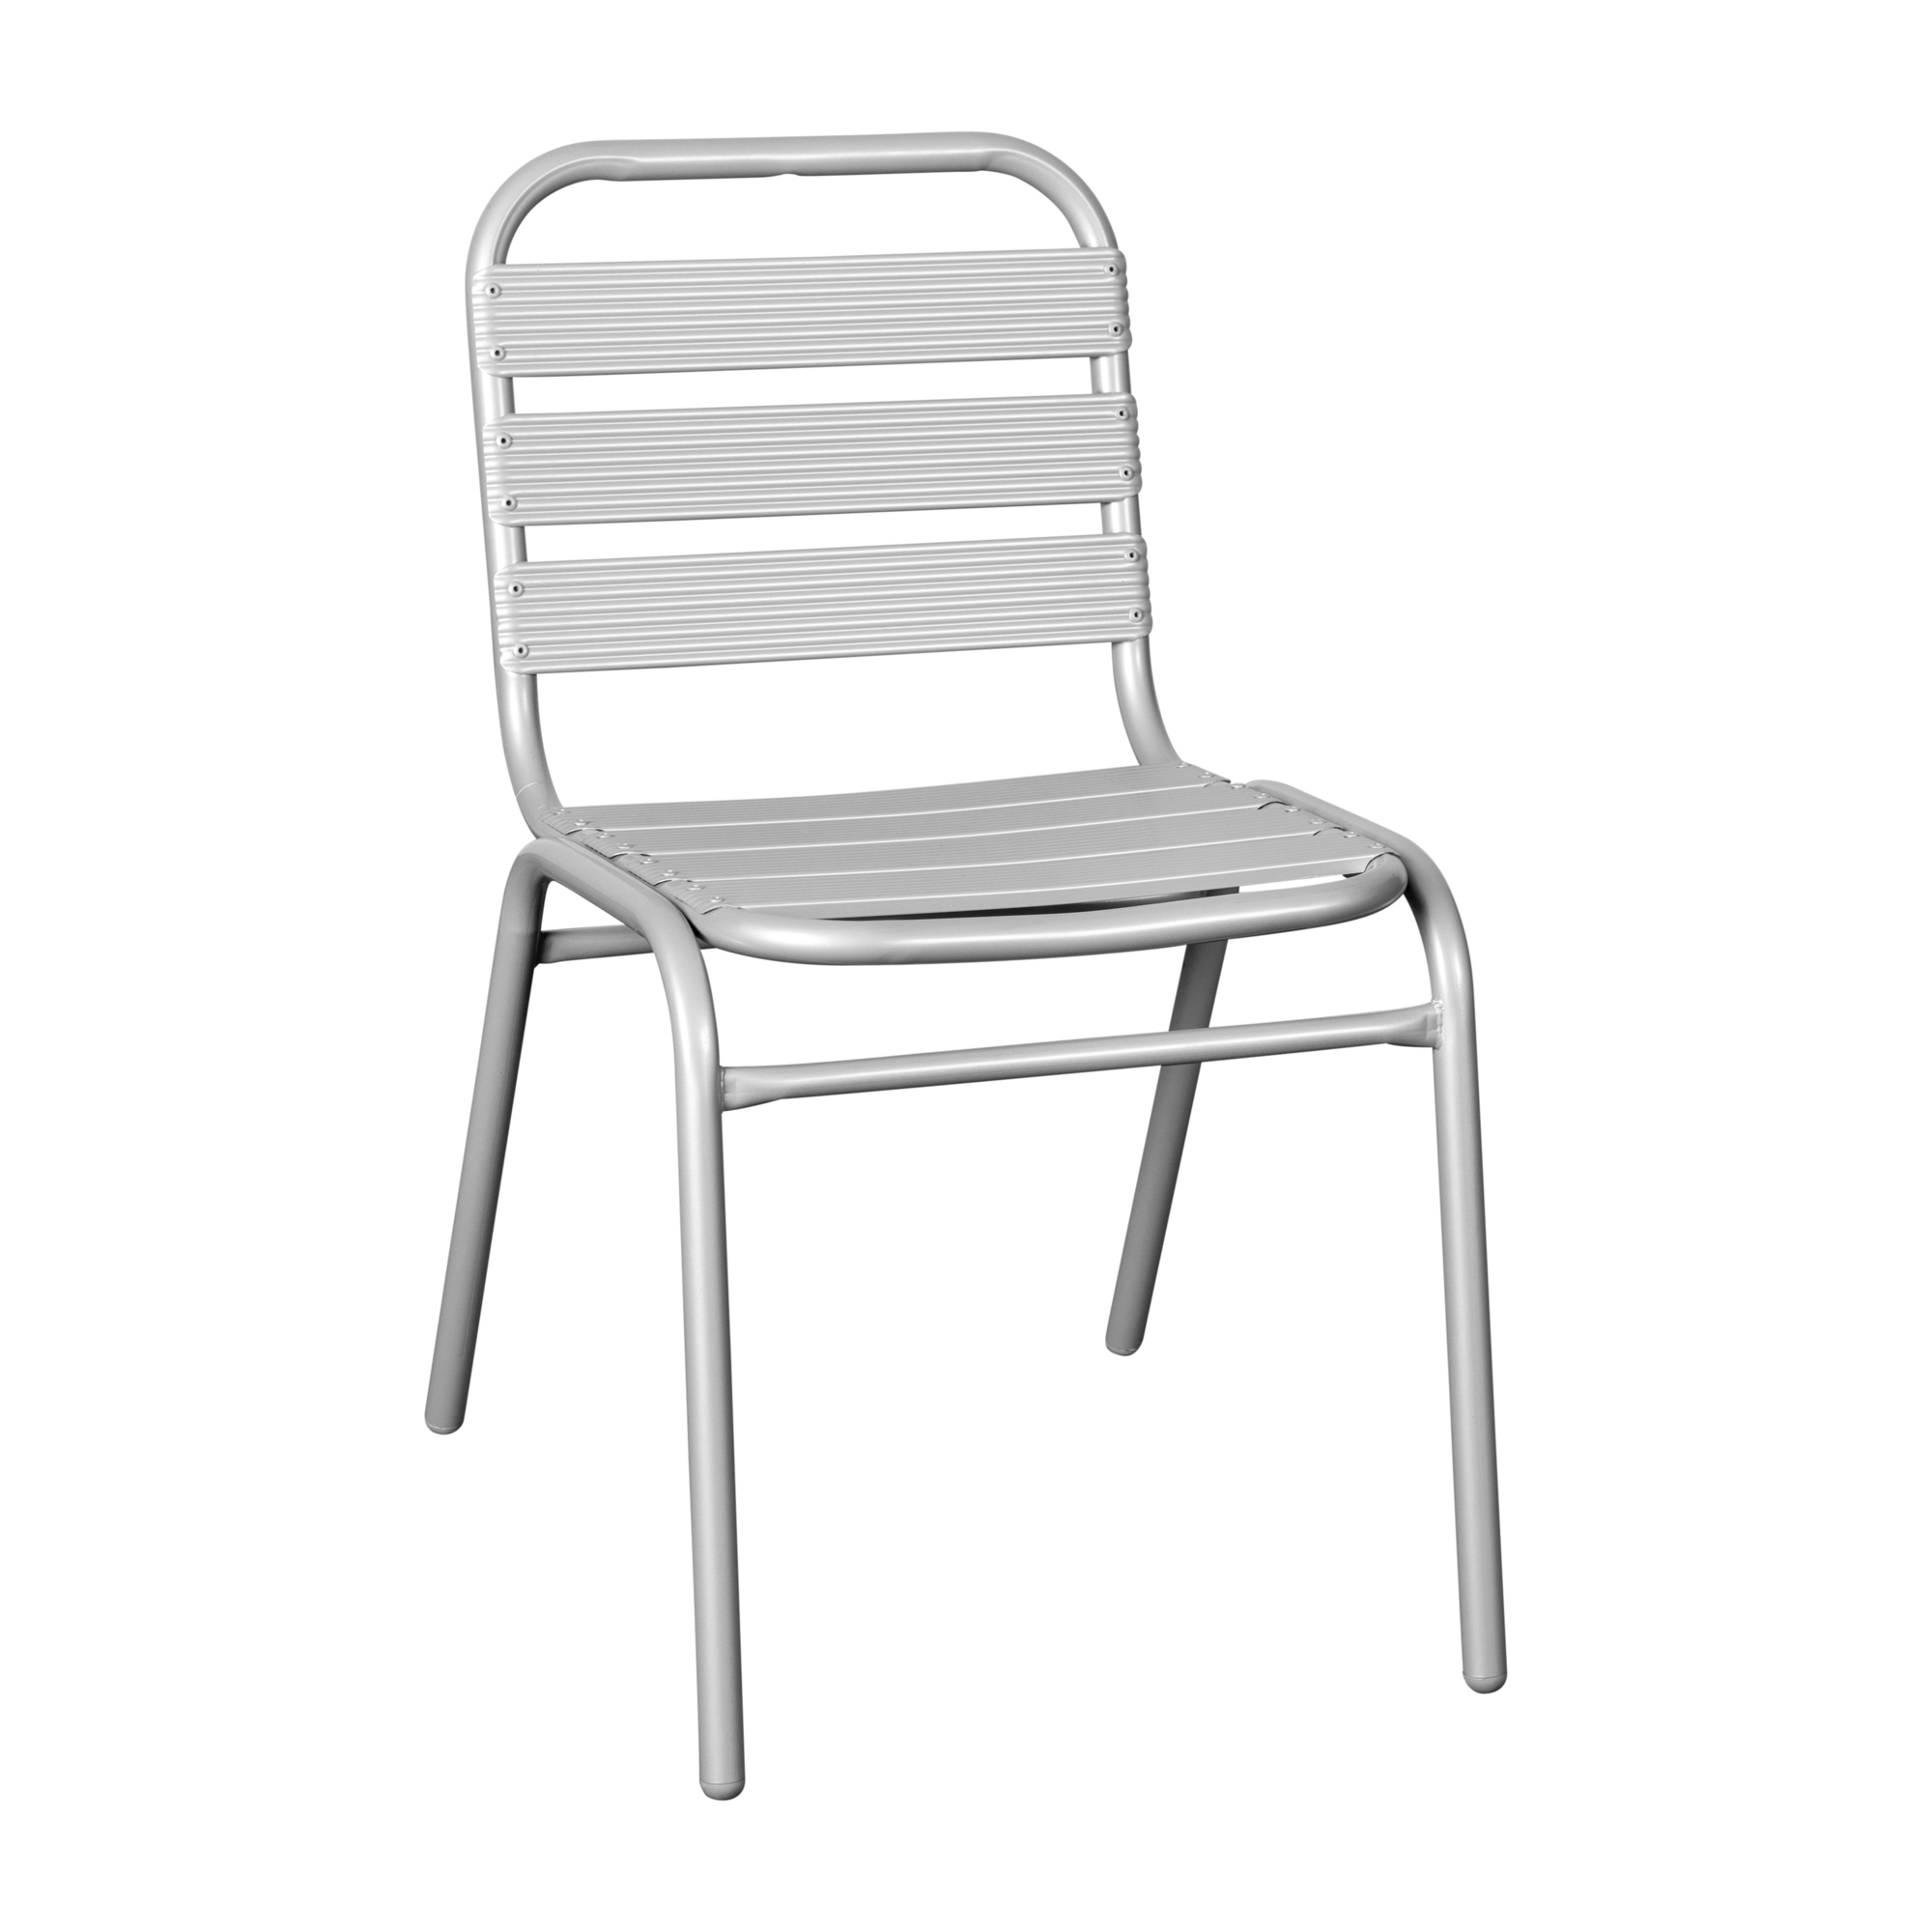 Flash Furniture, Commercial Silver Restaurant Stack Chair, Primary Color Gray, Material Aluminum, Width 19.5 in, Model TLH015C